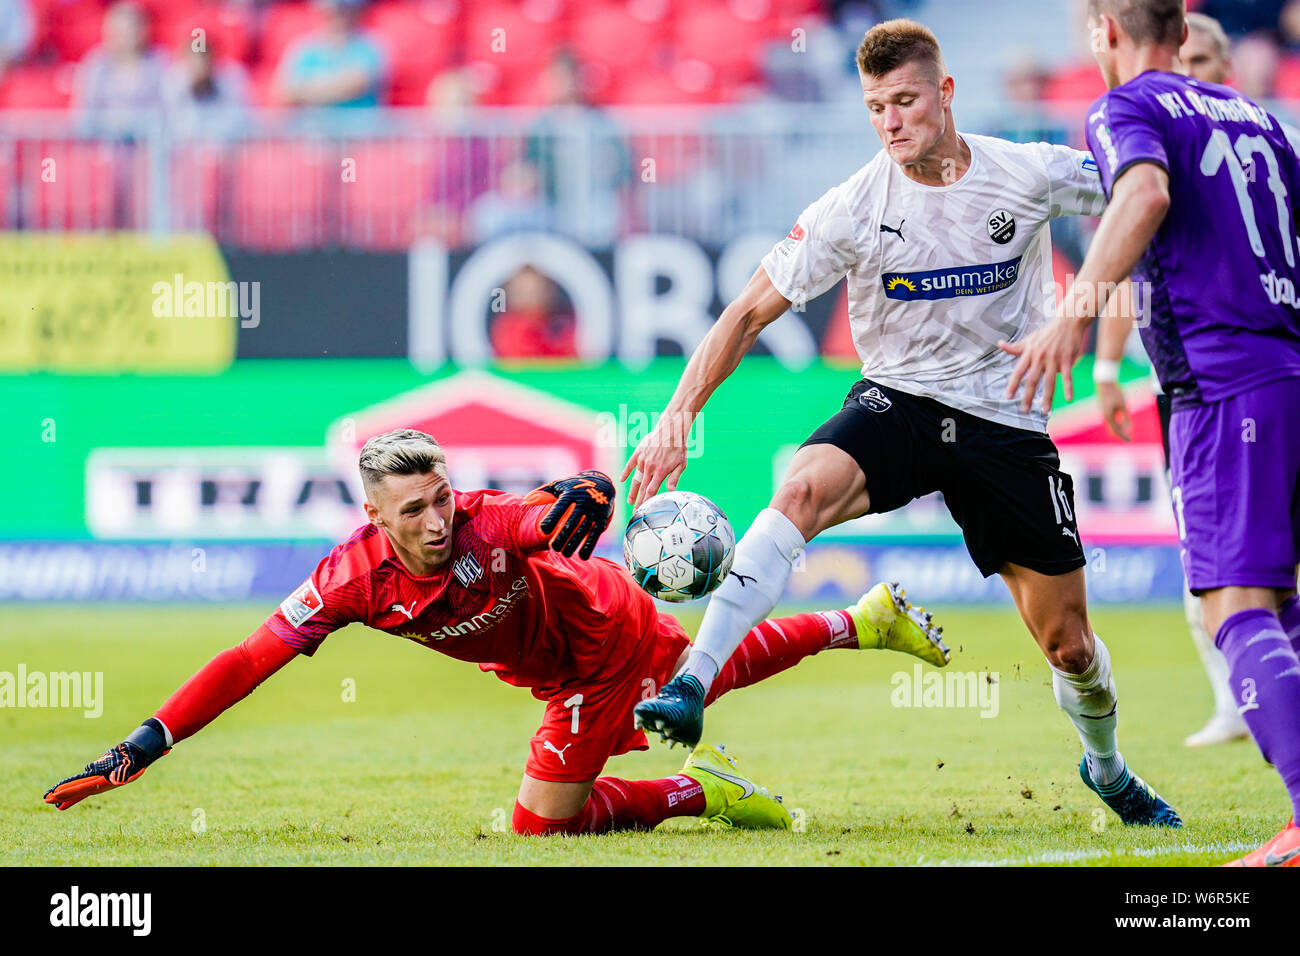 Sandhausen, Germany. 02nd Aug, 2019. Soccer: 2nd Bundesliga, SV Sandhausen - VfL Osnabrück, 2nd matchday, in Hardtwaldstadion. Osnabrück goalkeeper Nils Körber (l) and Sandhausens Kevin Behrens fight for the ball. Credit: Uwe Anspach/dpa - IMPORTANT NOTE: In accordance with the requirements of the DFL Deutsche Fußball Liga or the DFB Deutscher Fußball-Bund, it is prohibited to use or have used photographs taken in the stadium and/or the match in the form of sequence images and/or video-like photo sequences./dpa/Alamy Live News Stock Photo